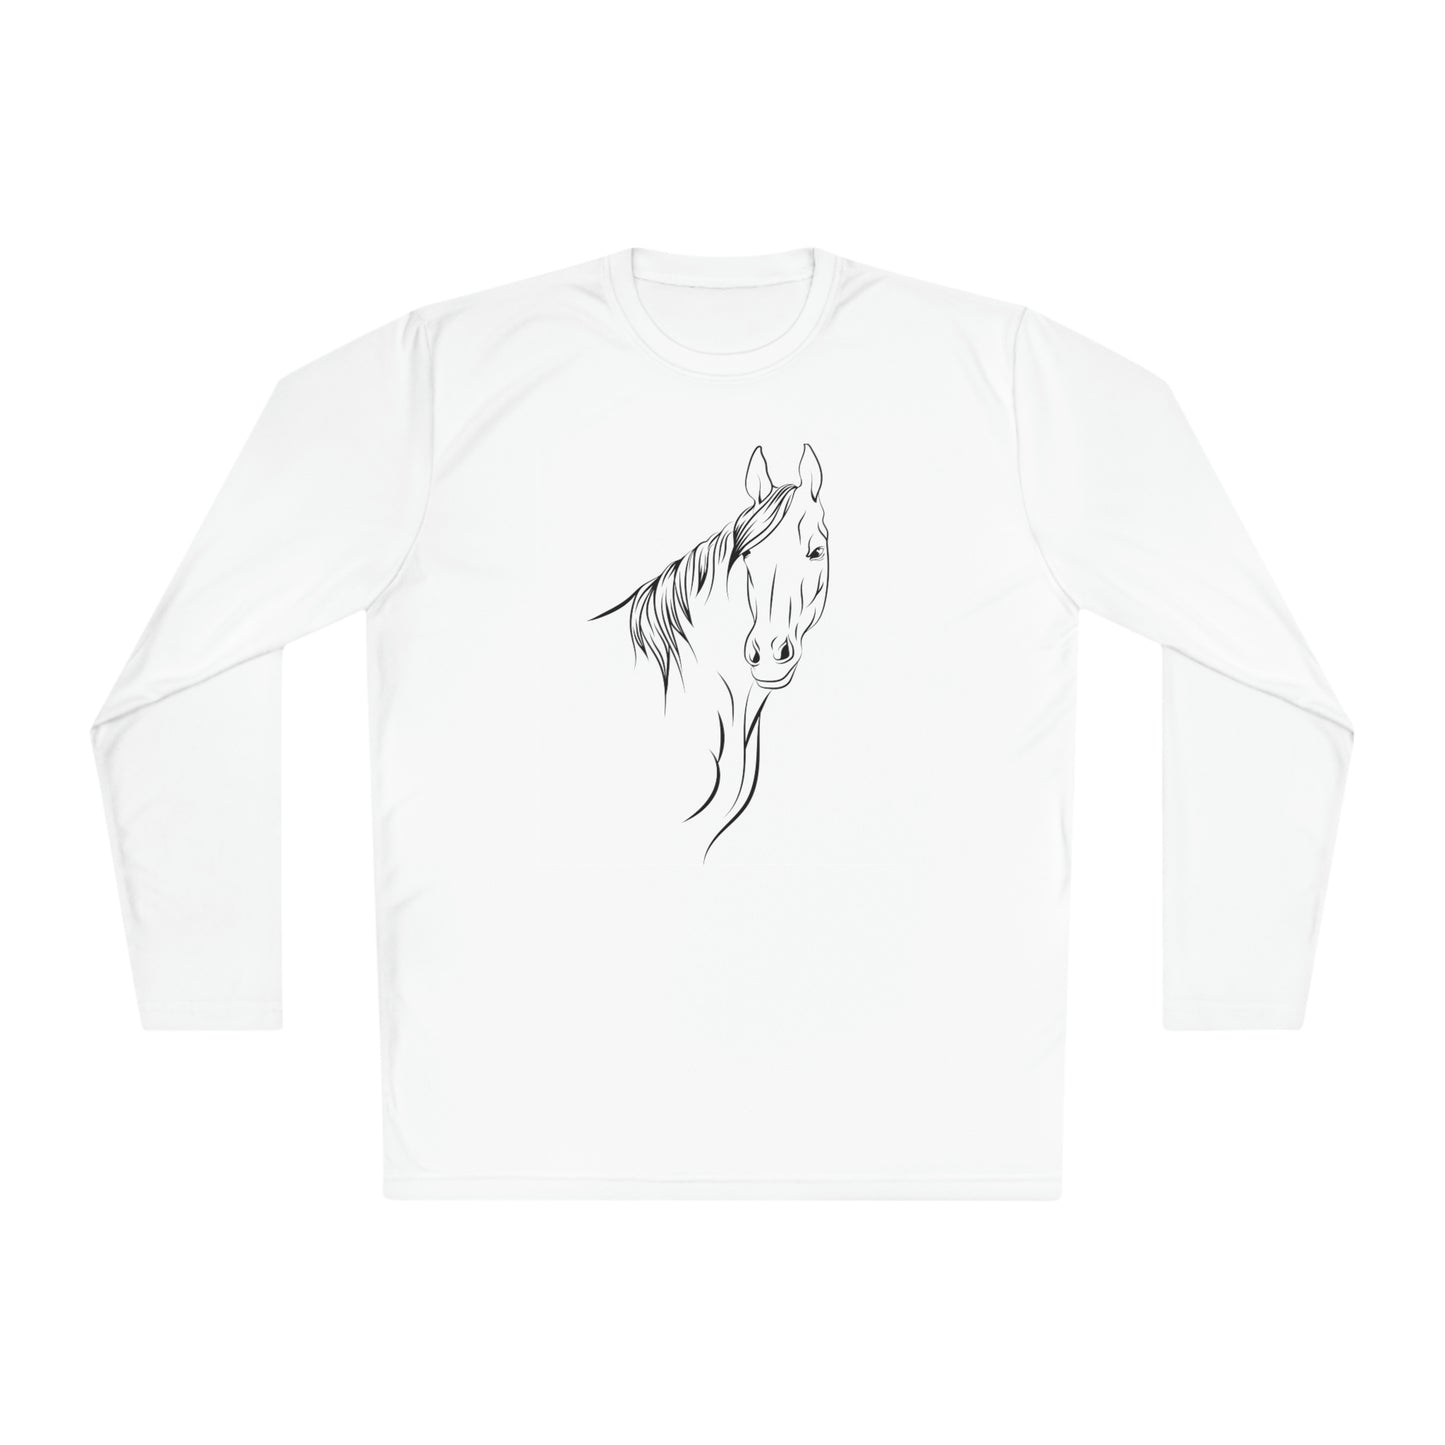 A Comfortable Shirt Long Sleeve Express Your Love for Horses with Konaloo's Long Sleeve Women's Horse Lover T-Shirt Collection - Perfect Gifts for Horse Owners, Moms, and Dads!